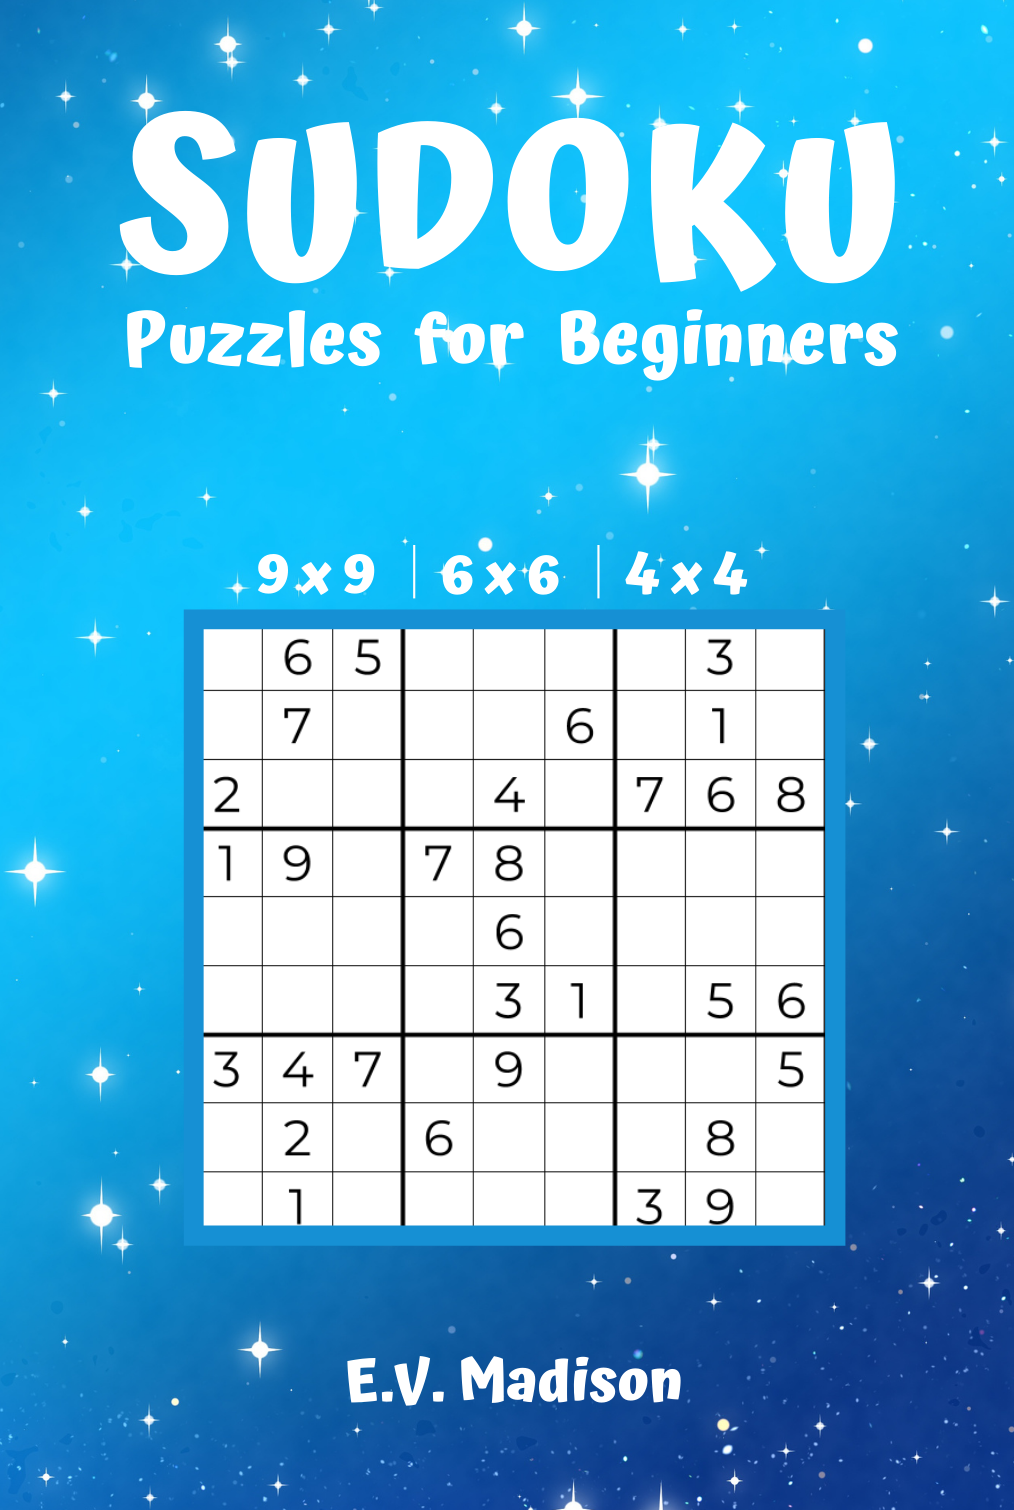 SUDOKU Puzzles for Beginners